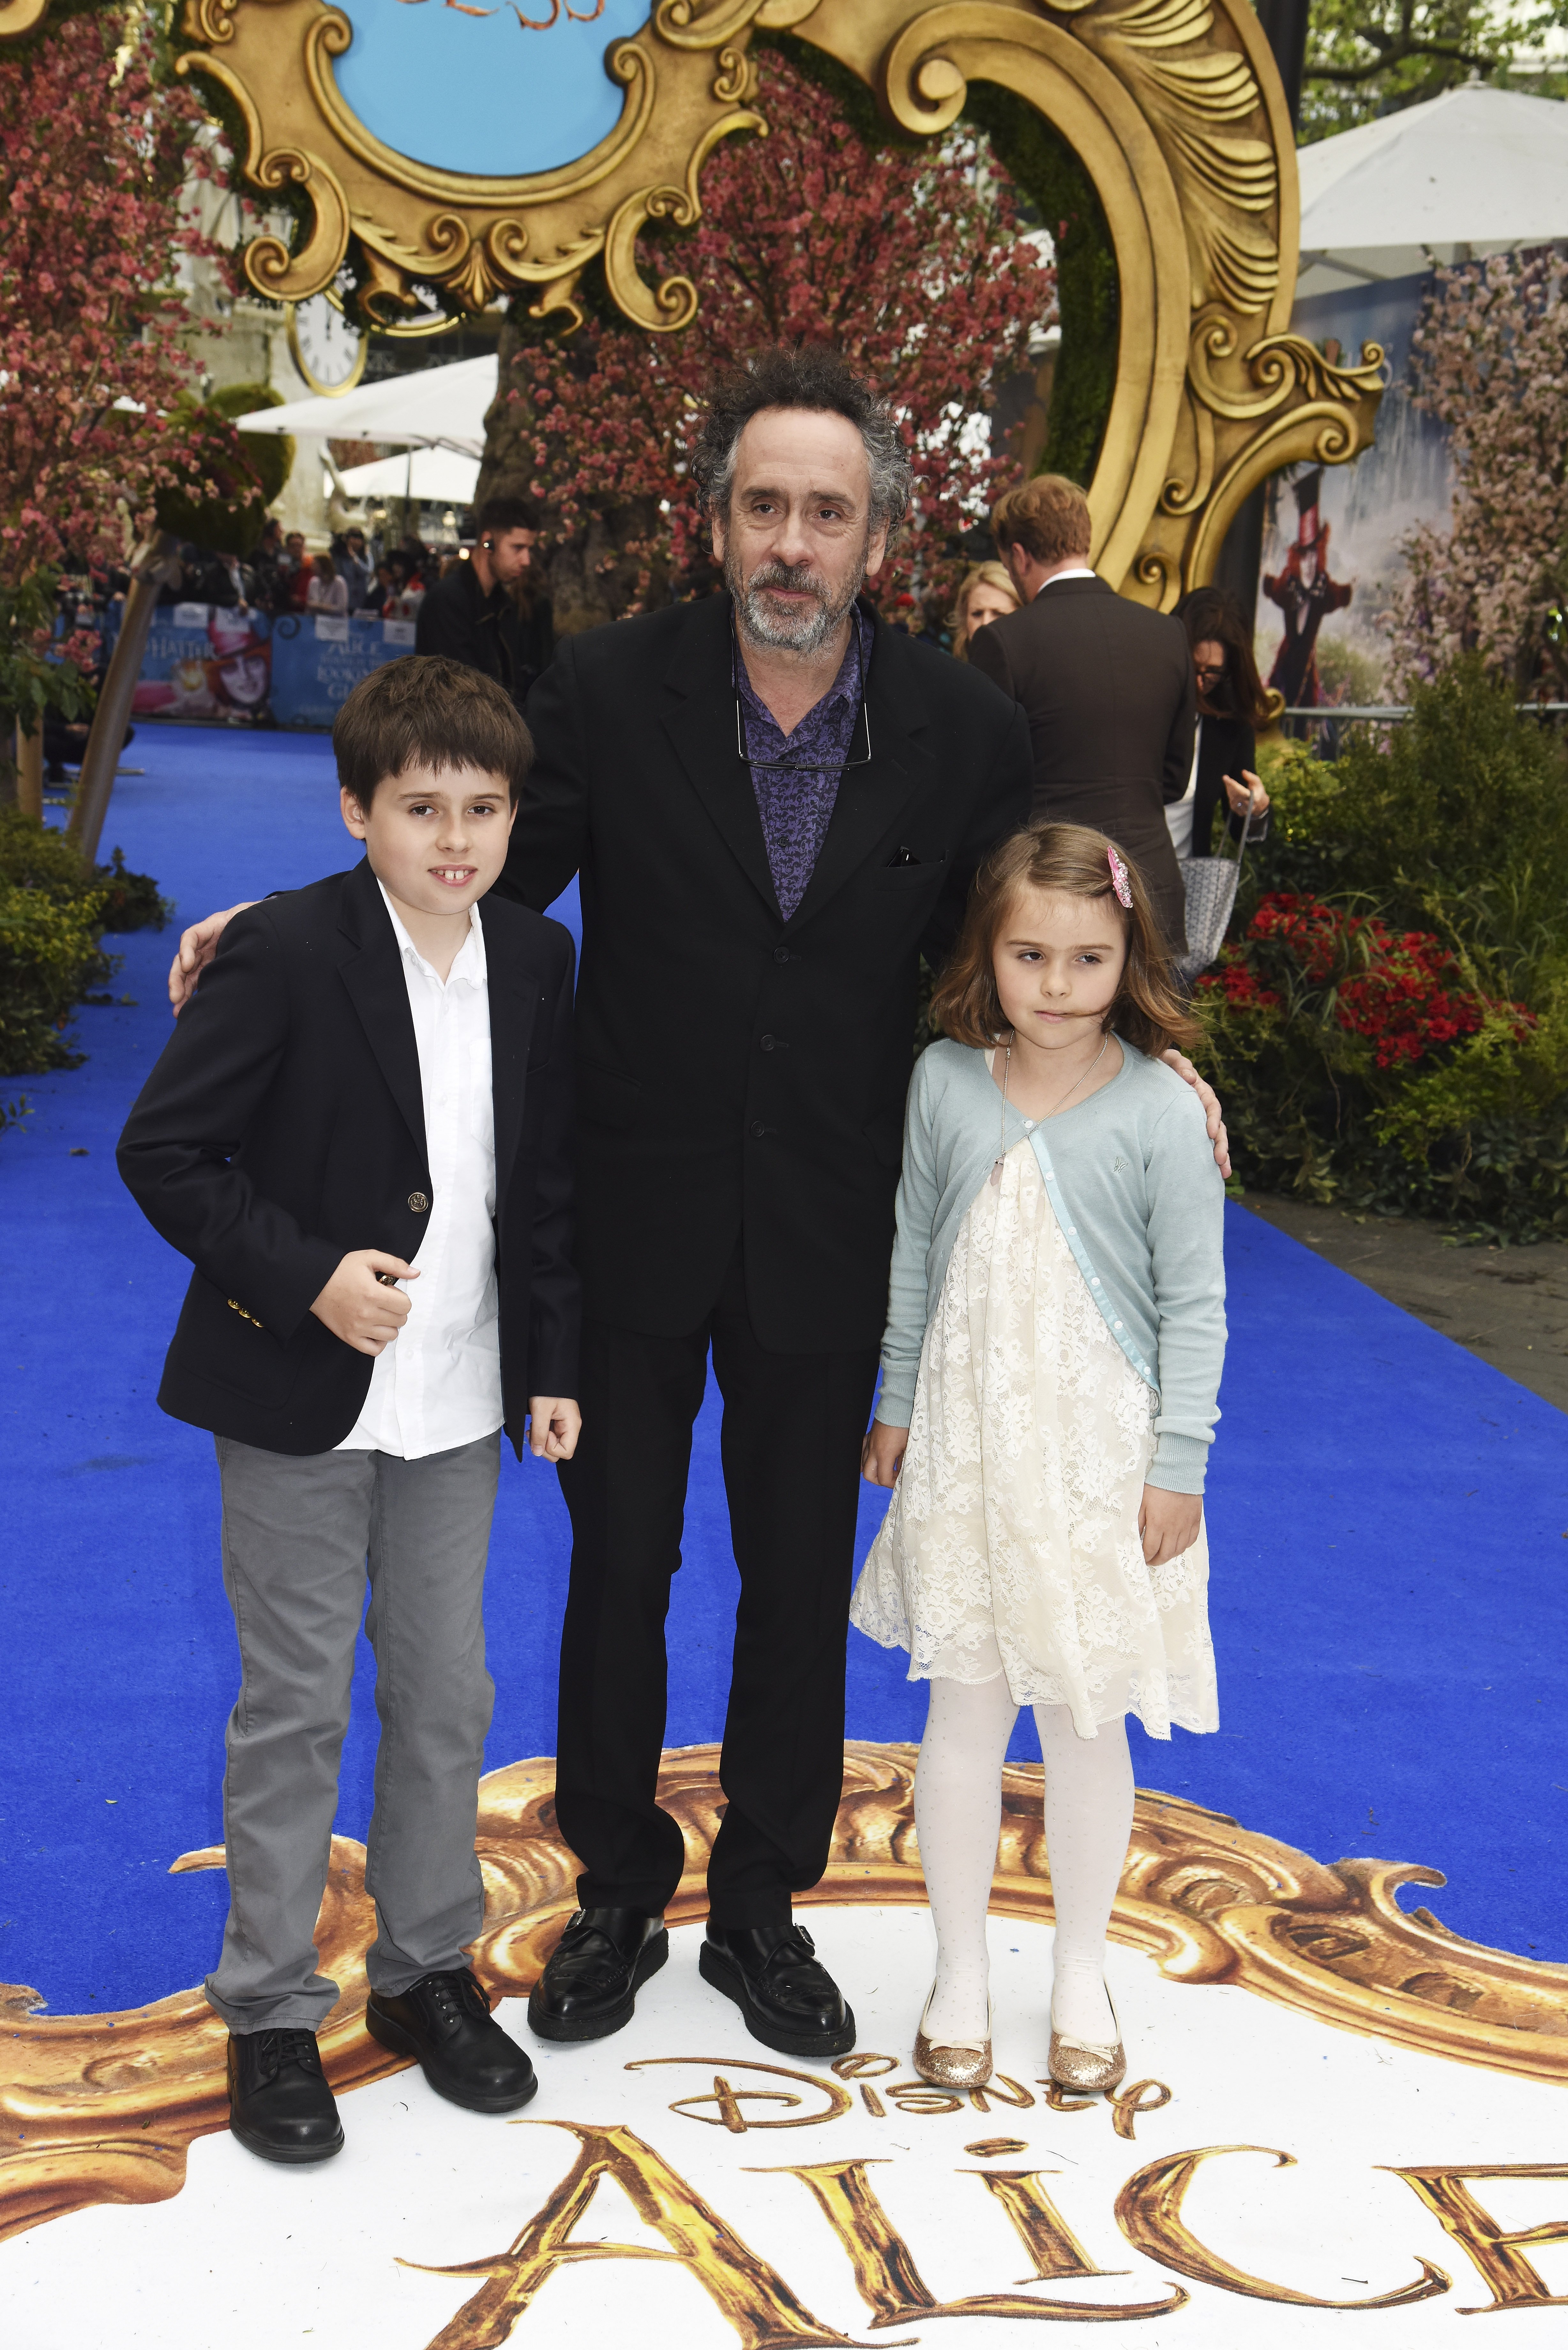 Tim Burton, Billy Burton and Nell Burton during the European Premiere of "Alice Through The Looking Glass" at Odeon Leicester Square on May 10, 2016, in London, England. | Source: Getty Images